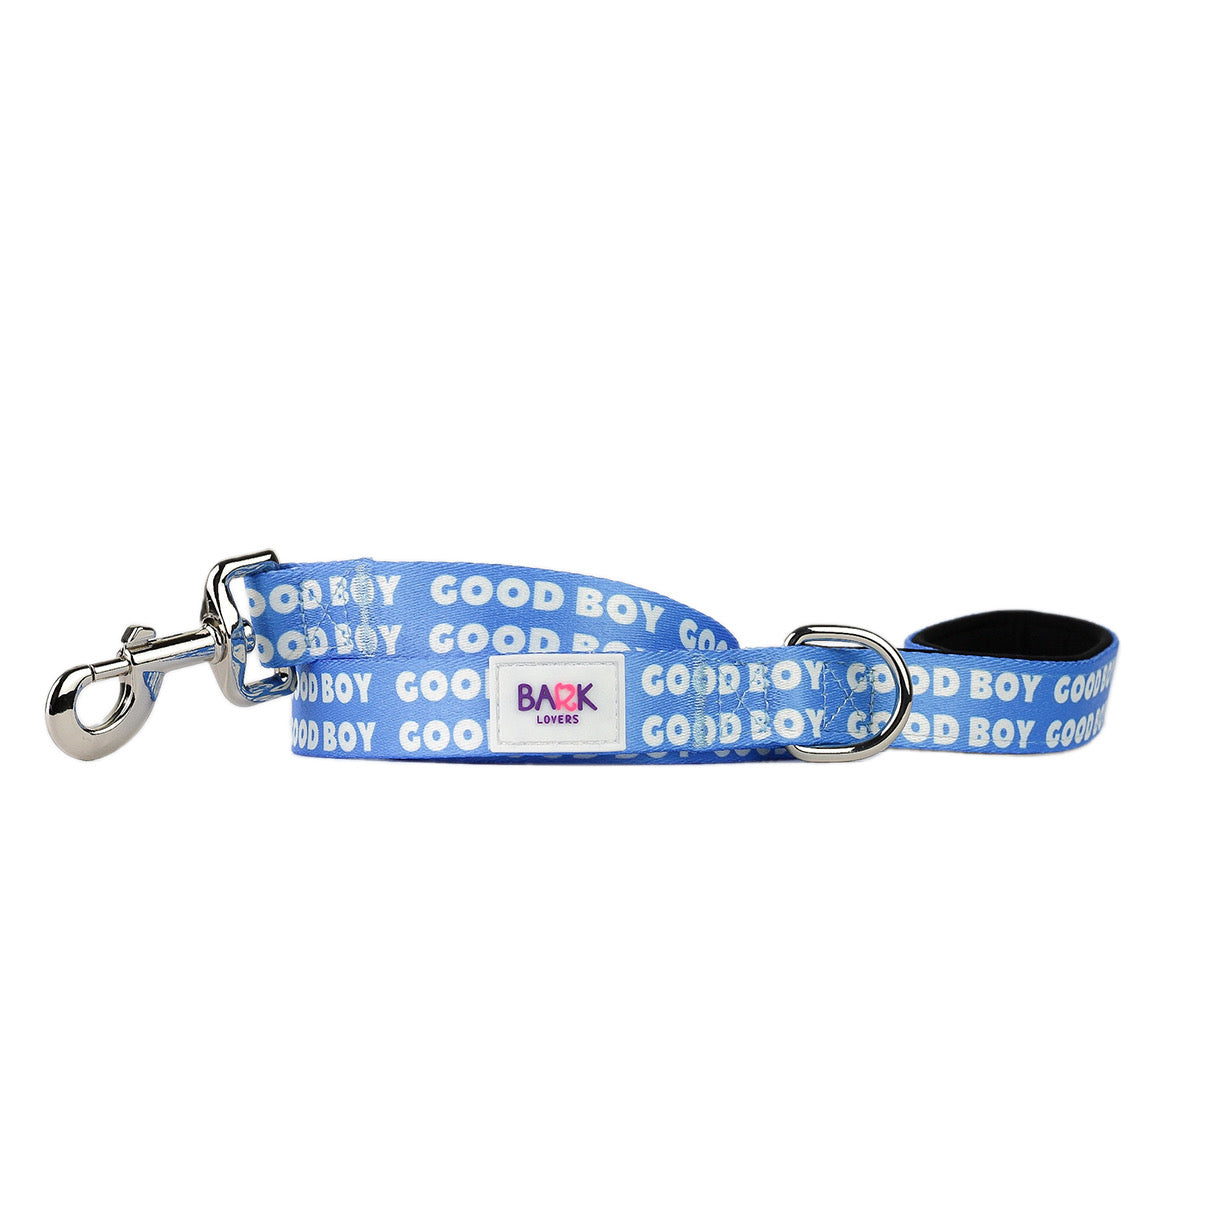 Good Boy Dog Leash - Keep your pup safe and close during walks.